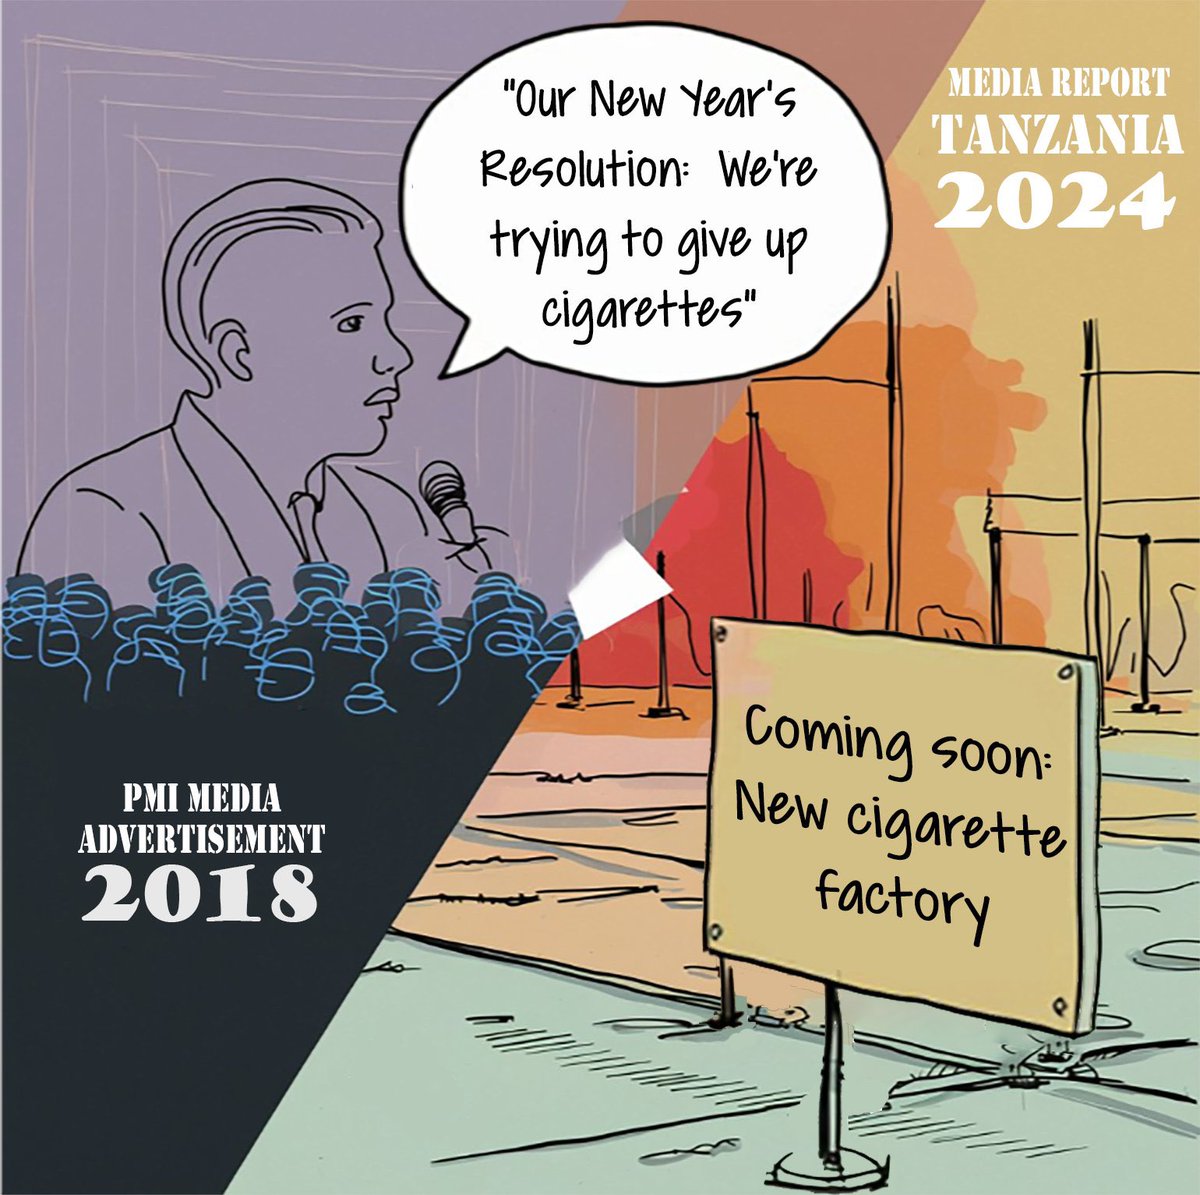 PMI has made numerous public claims of moving away from cigarette production towards a “smoke-free future.” And yet, it continues to build new cigarette factories, like its latest in Tanzania. ow.ly/L99650RzCPP. Philip Morris International, no more! #MakeBigTobaccoPay!